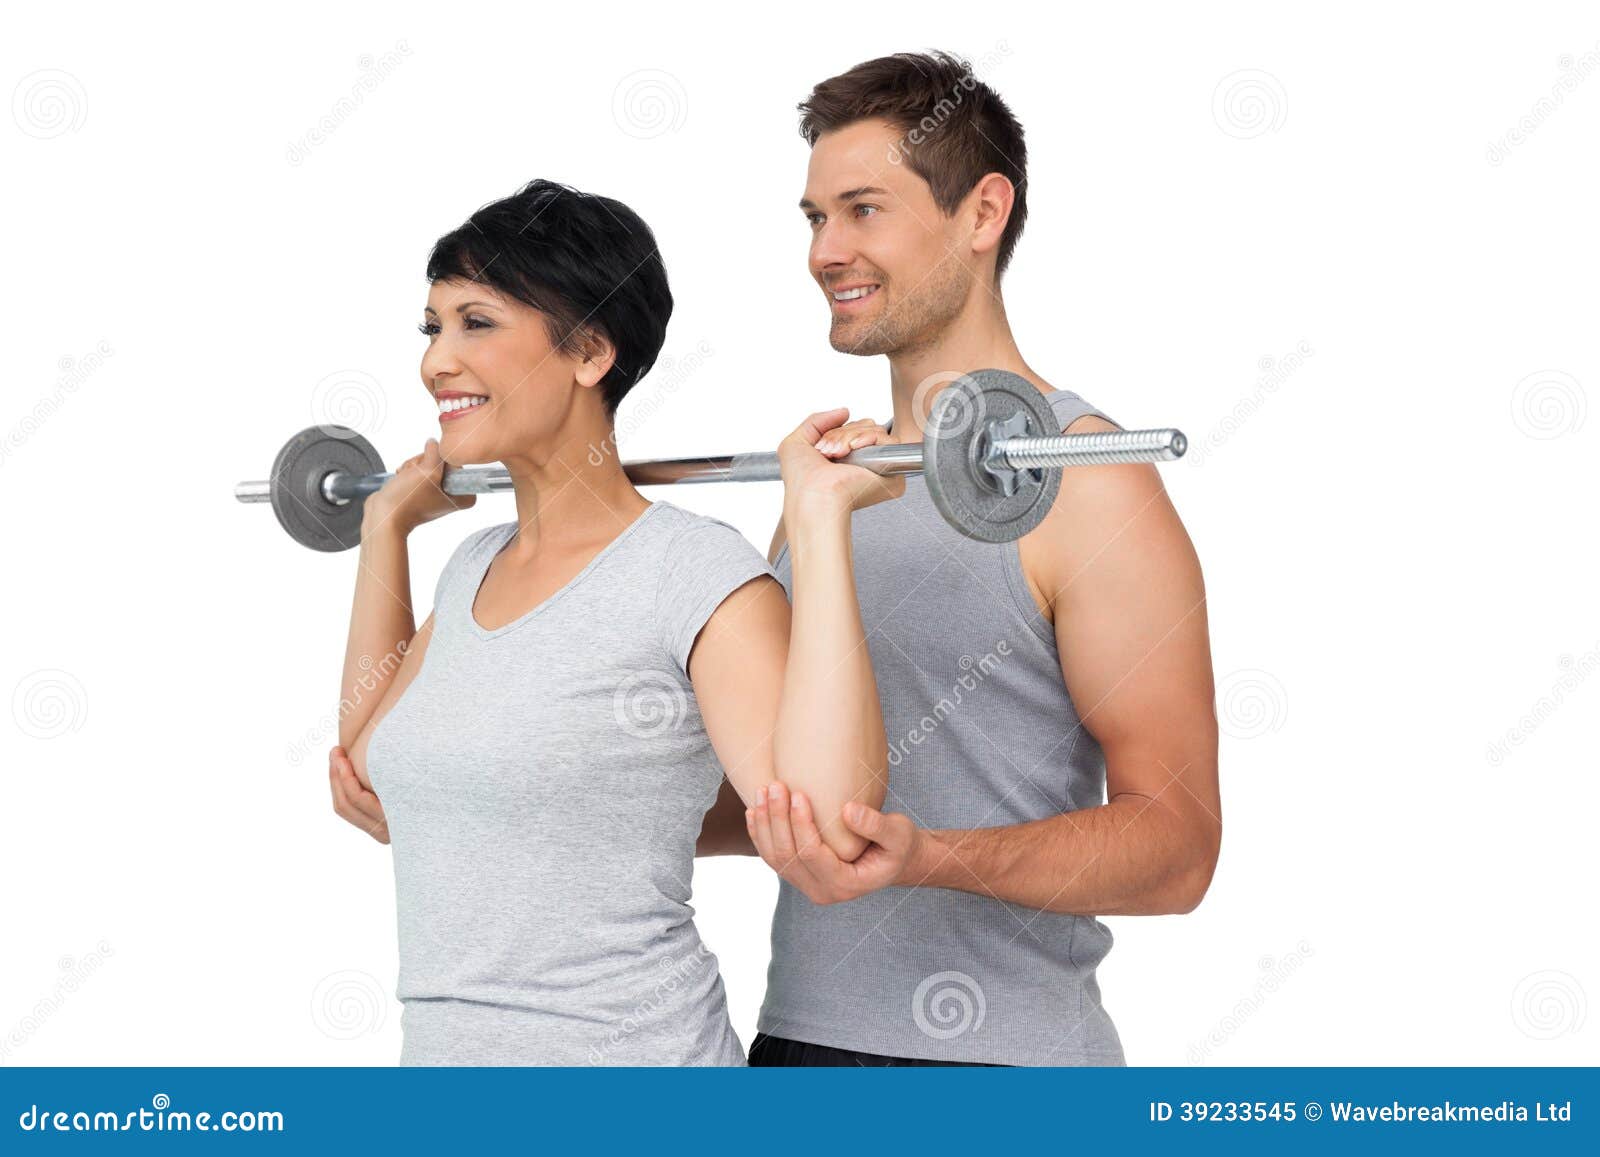 2,338 Female Personal Trainer White Background Stock Photos - Free &  Royalty-Free Stock Photos from Dreamstime